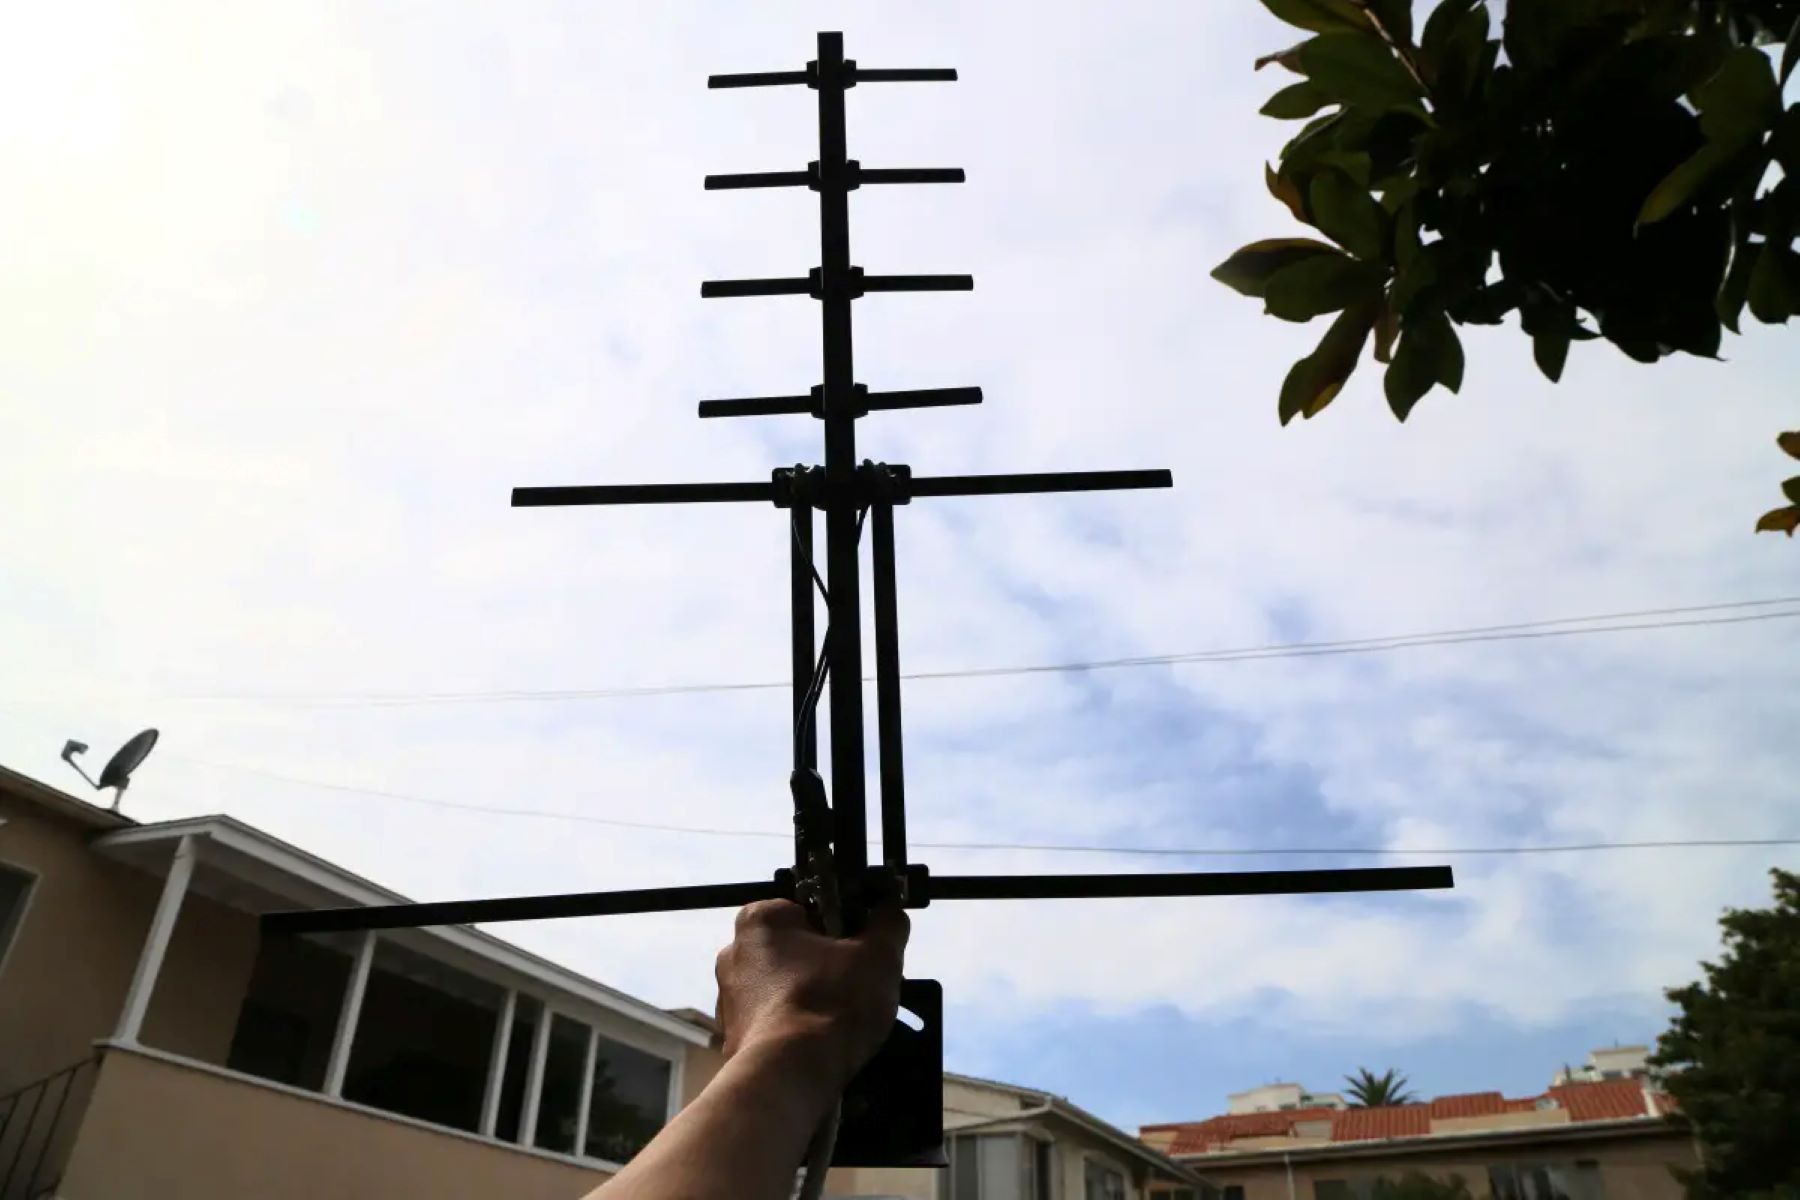 How To Get Best Reception With Tv Antenna